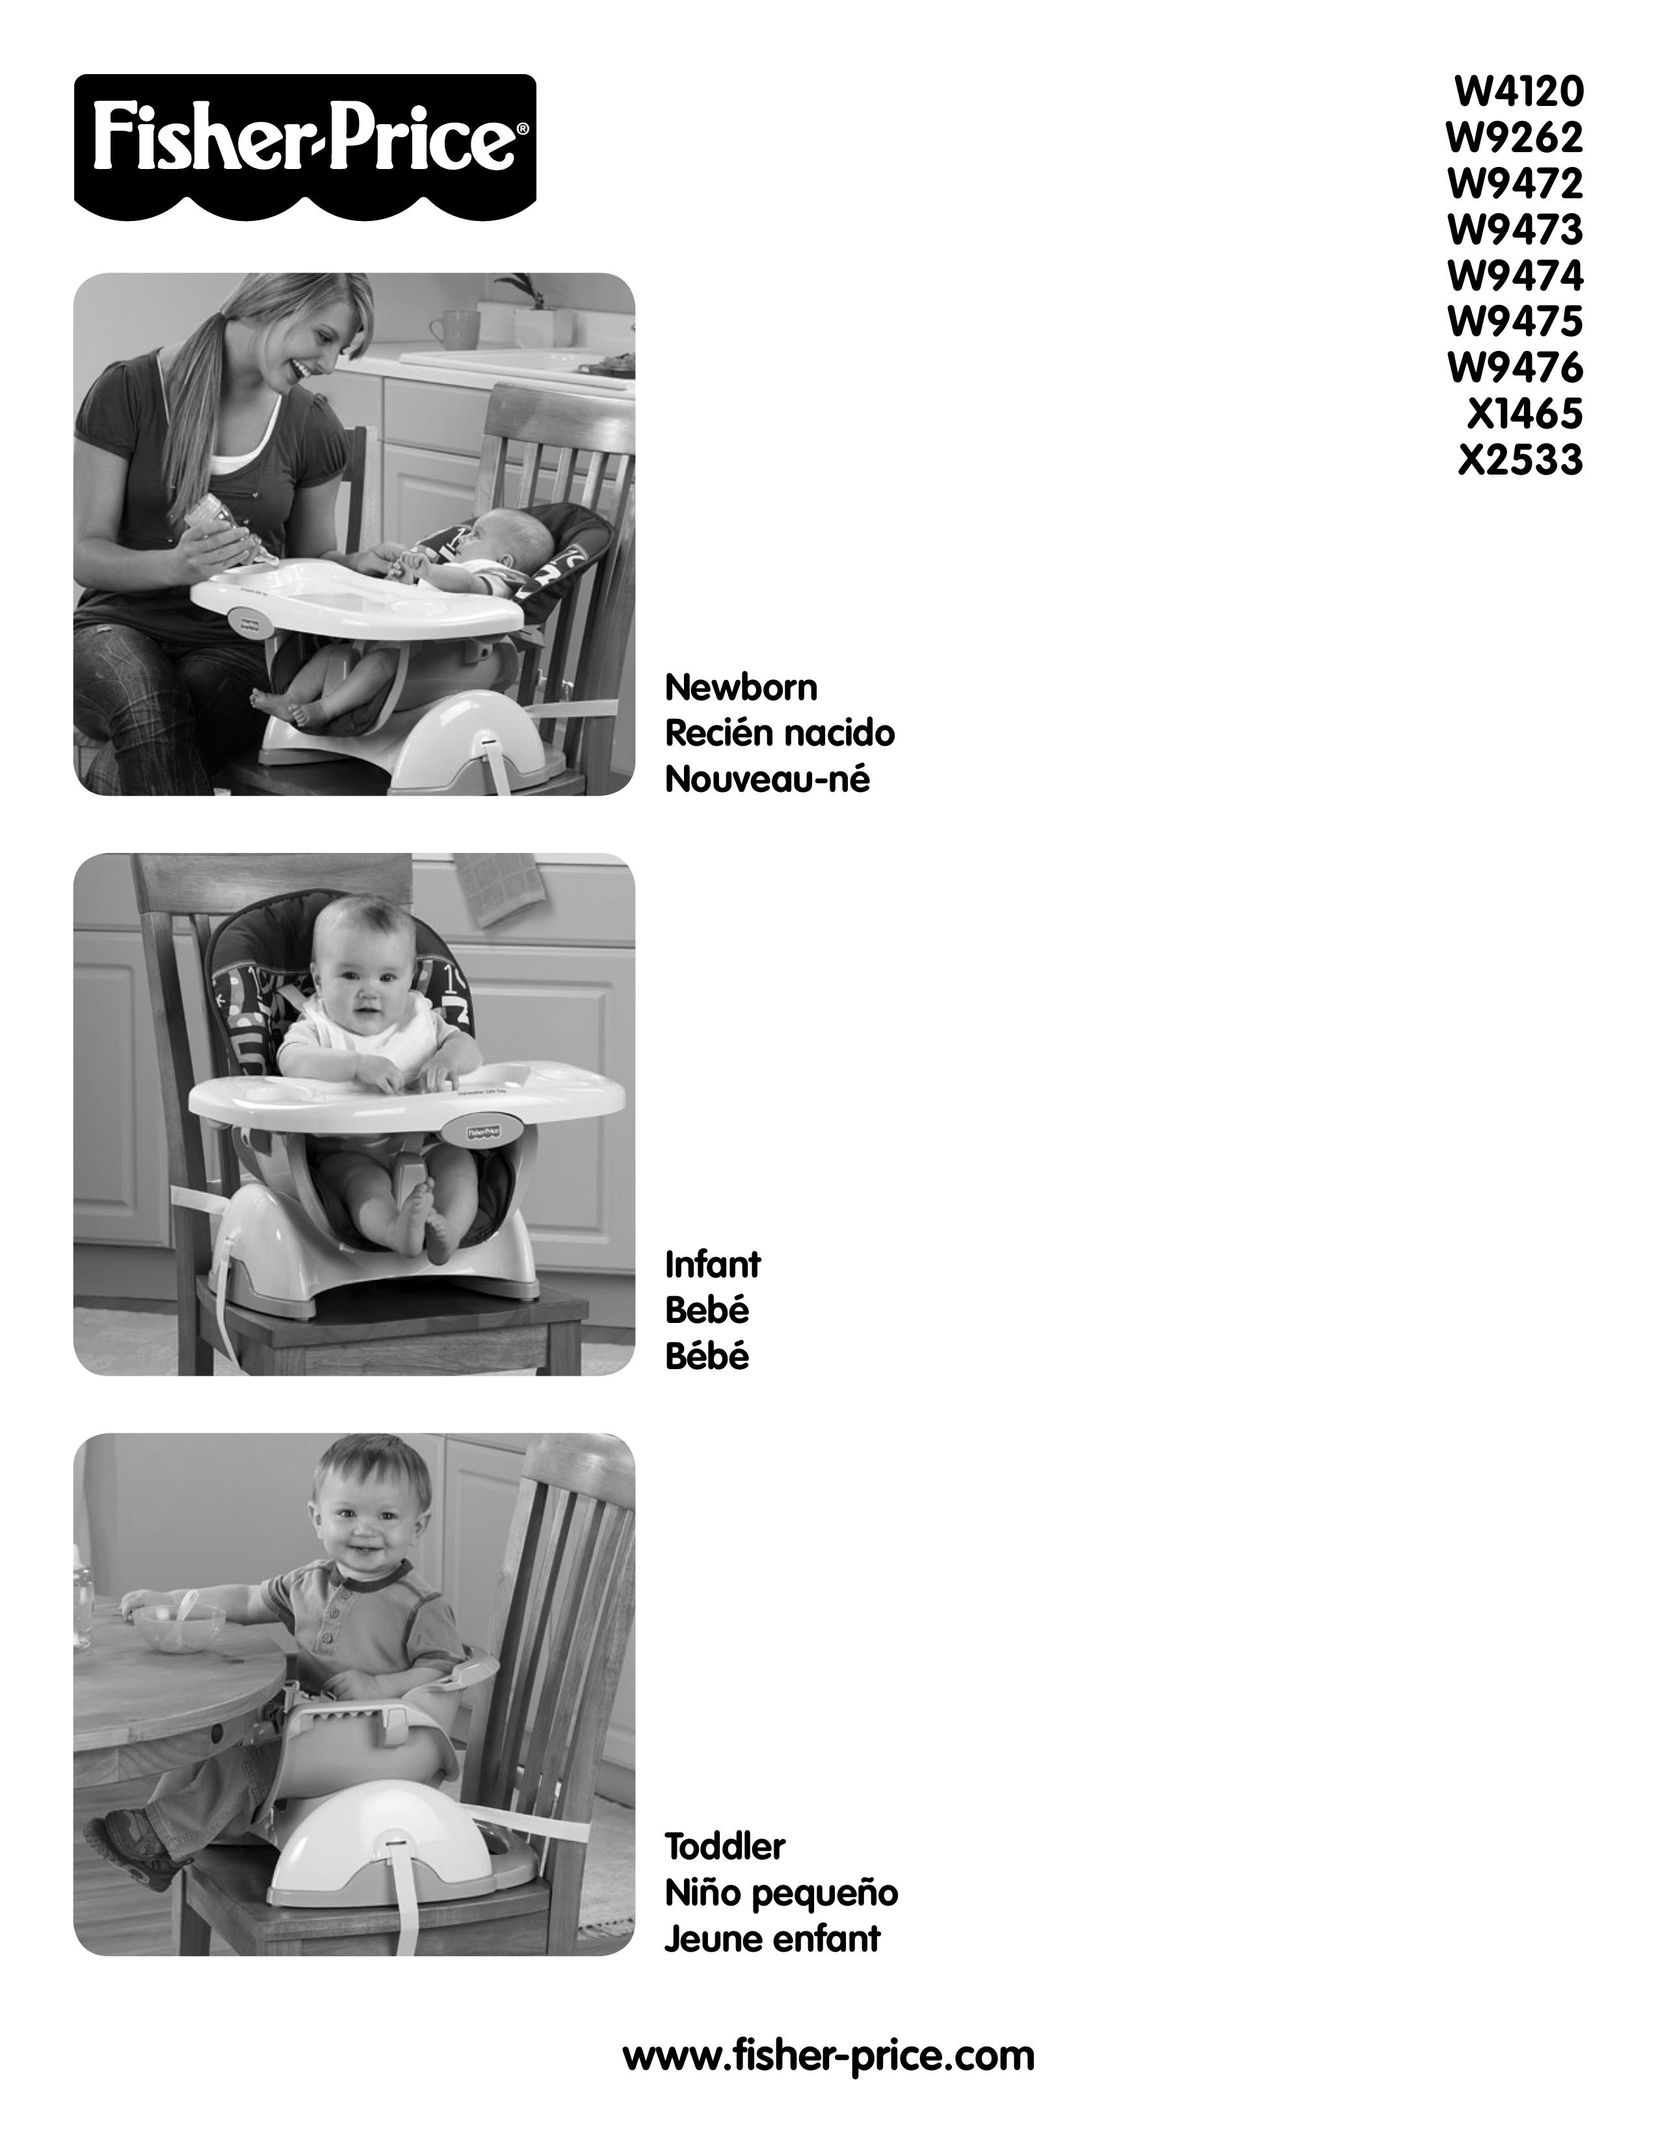 Fisher-Price W9474 High Chair User Manual